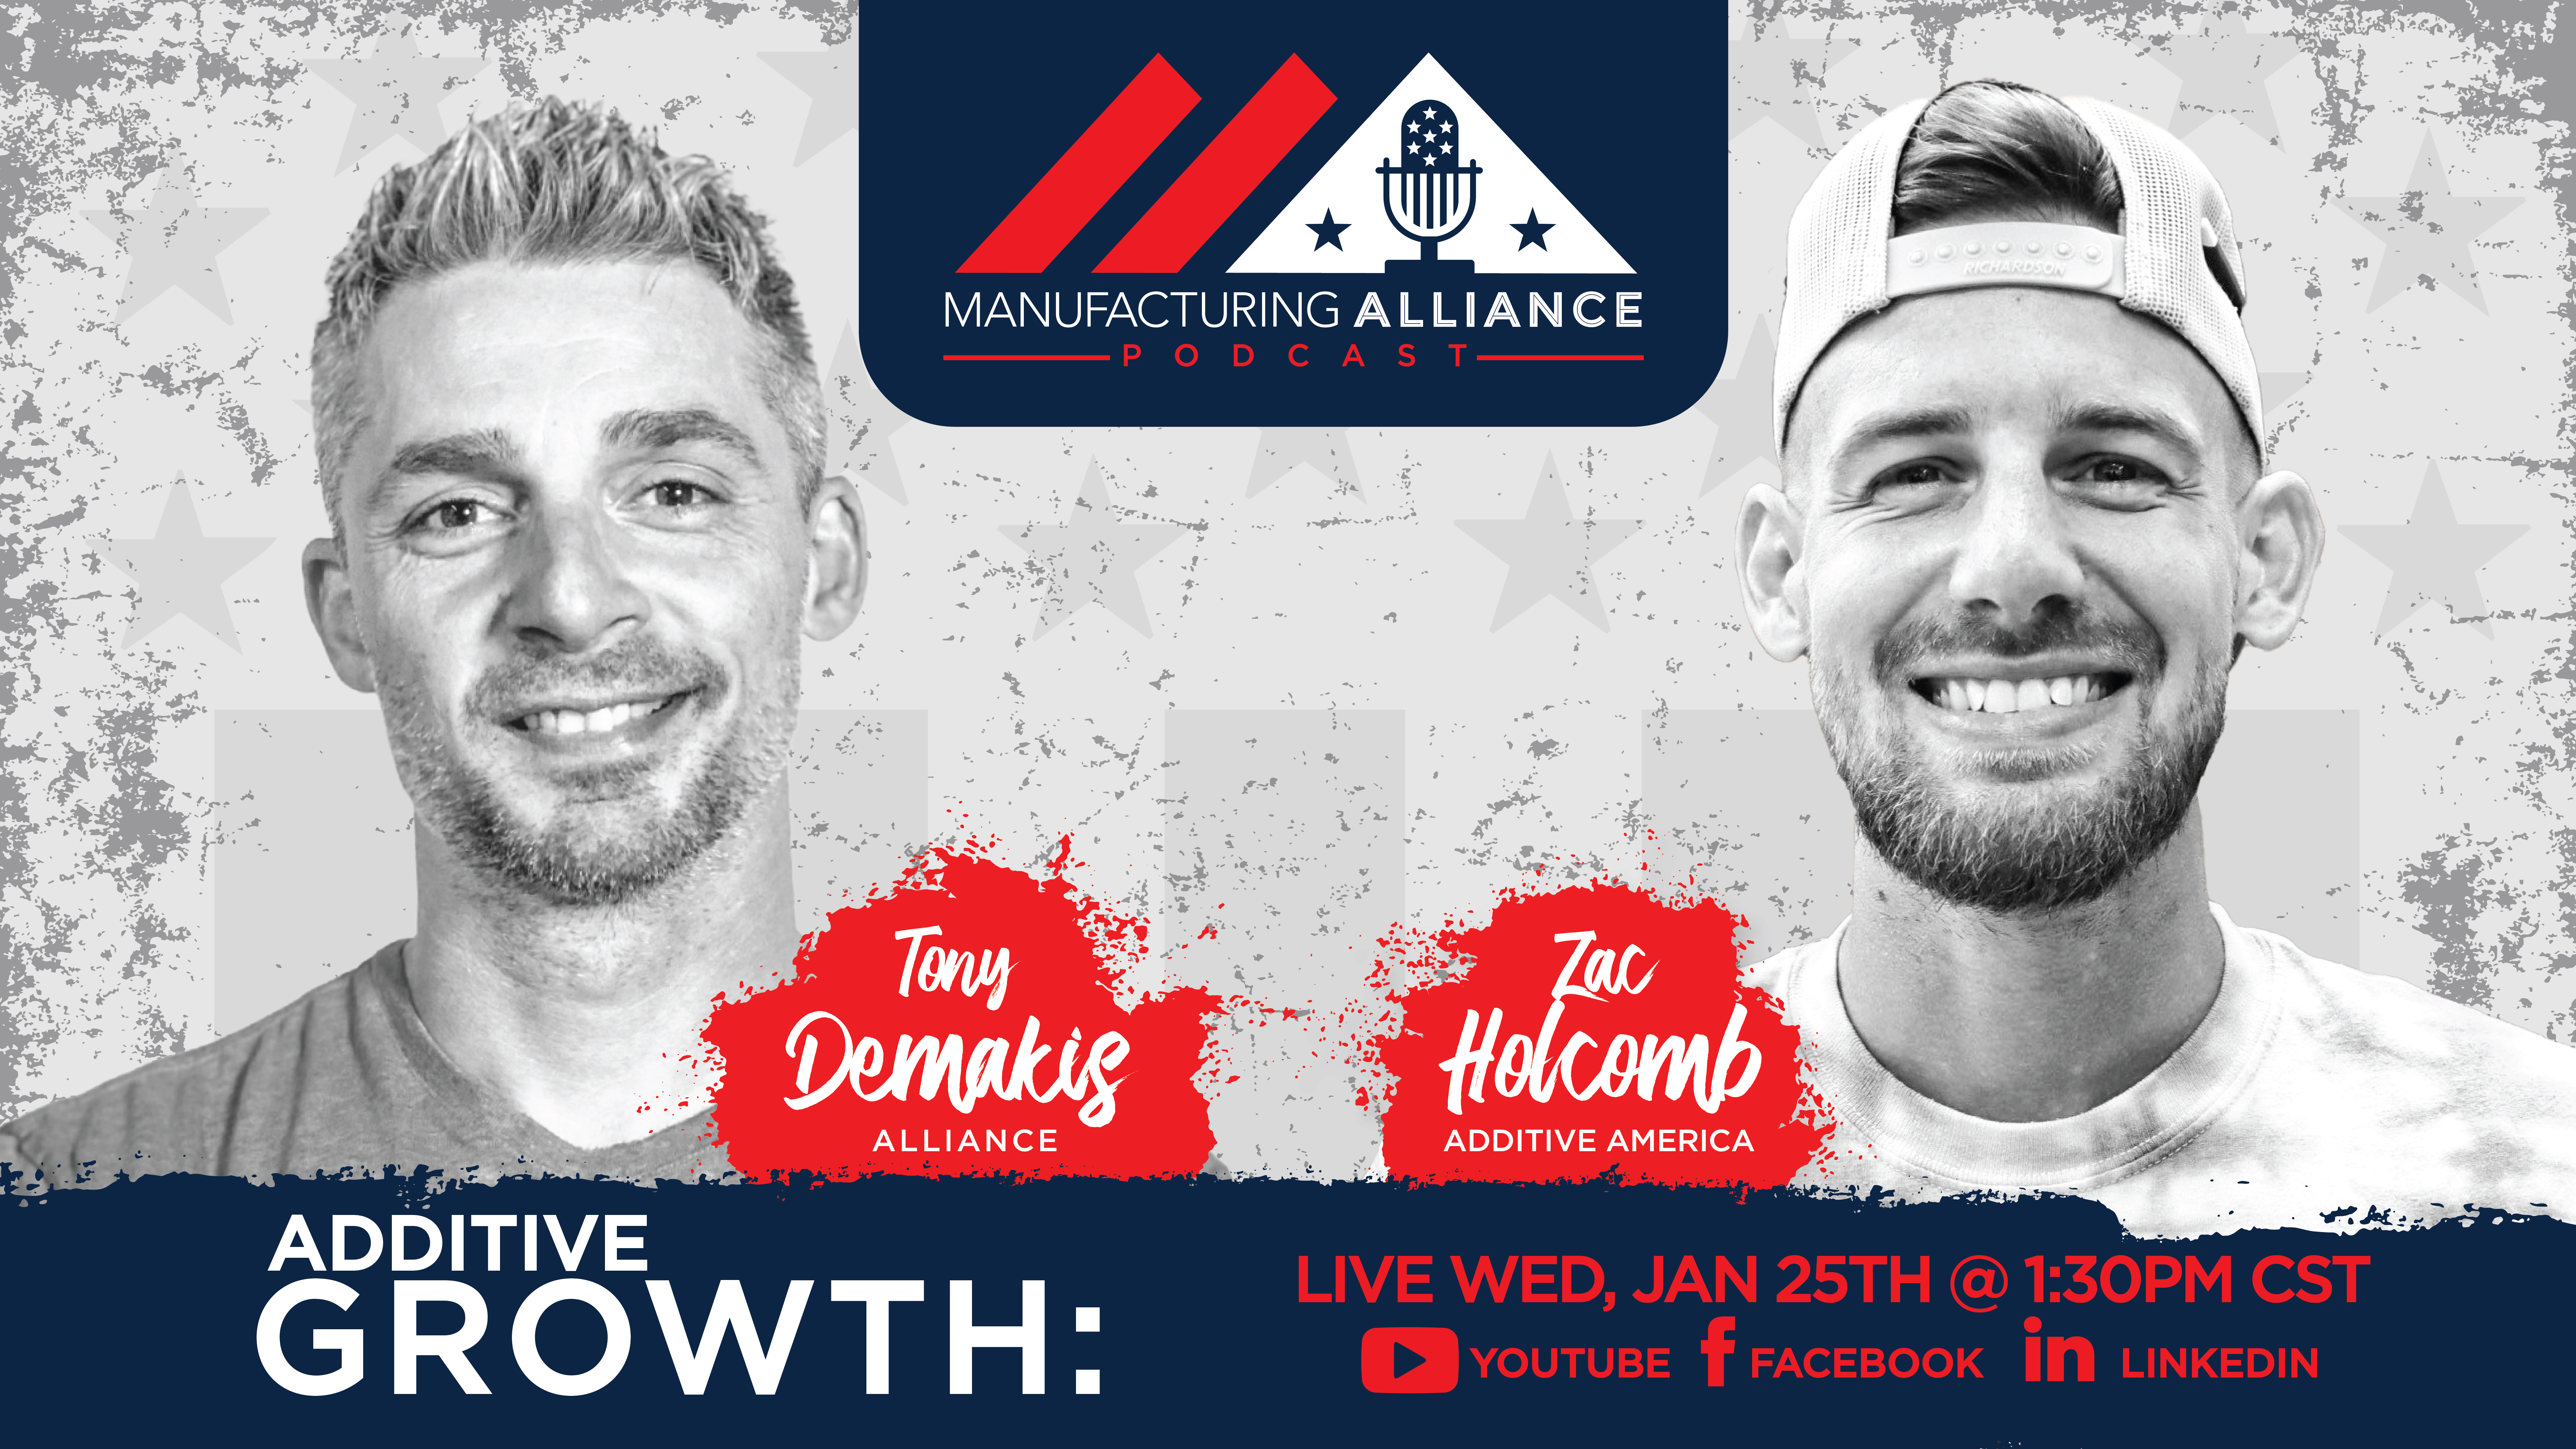 The Manufacturing Alliance Podcast Presents: Zac Holcomb | Additive America